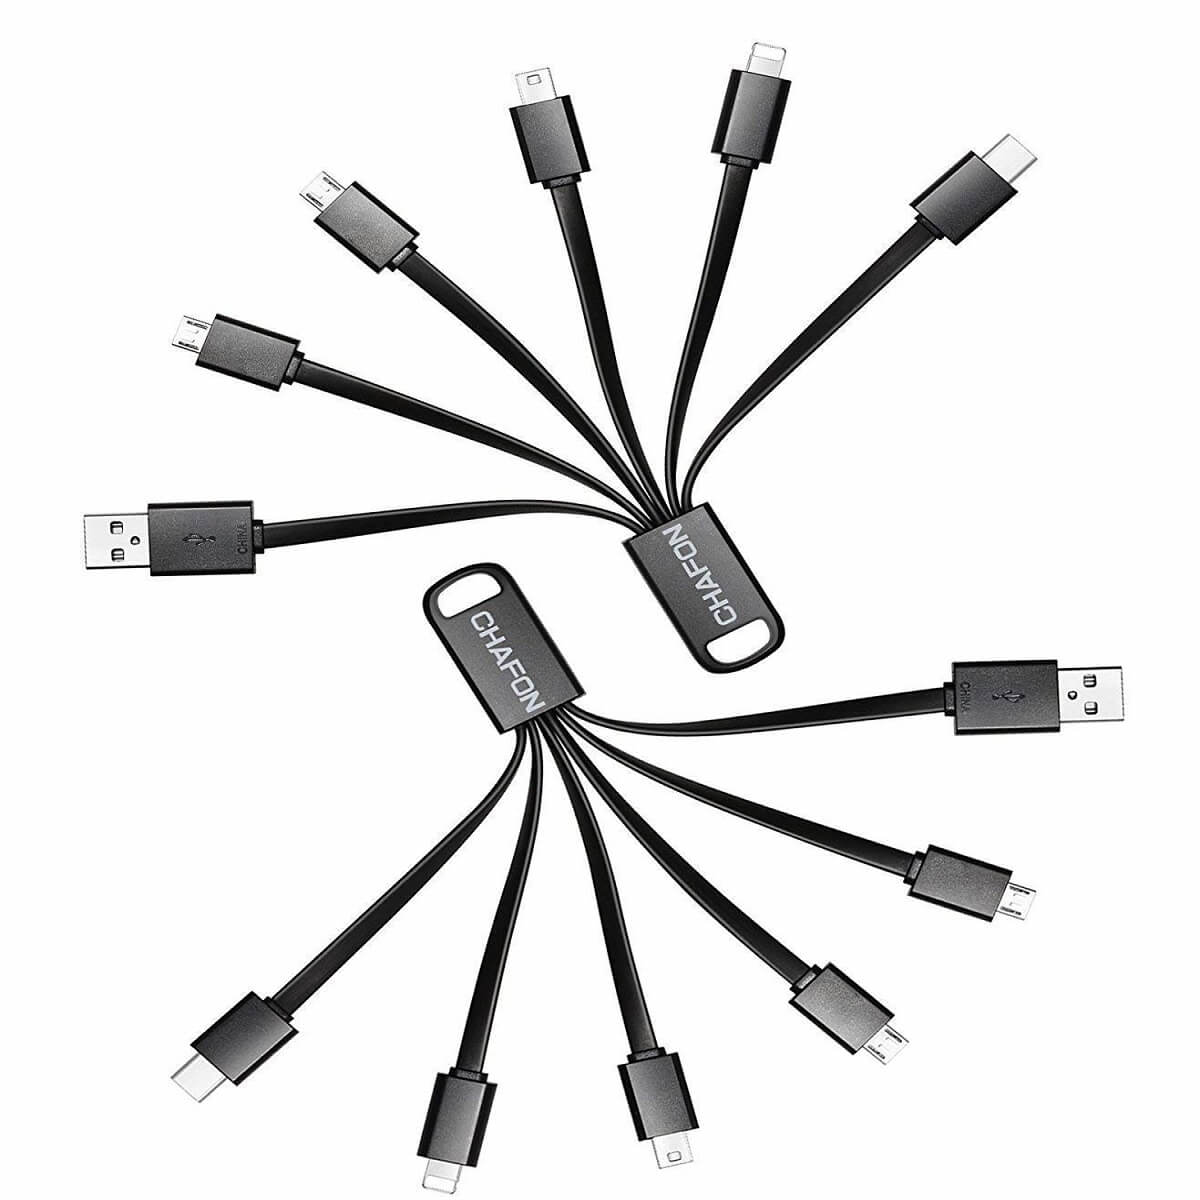 usb cable ends